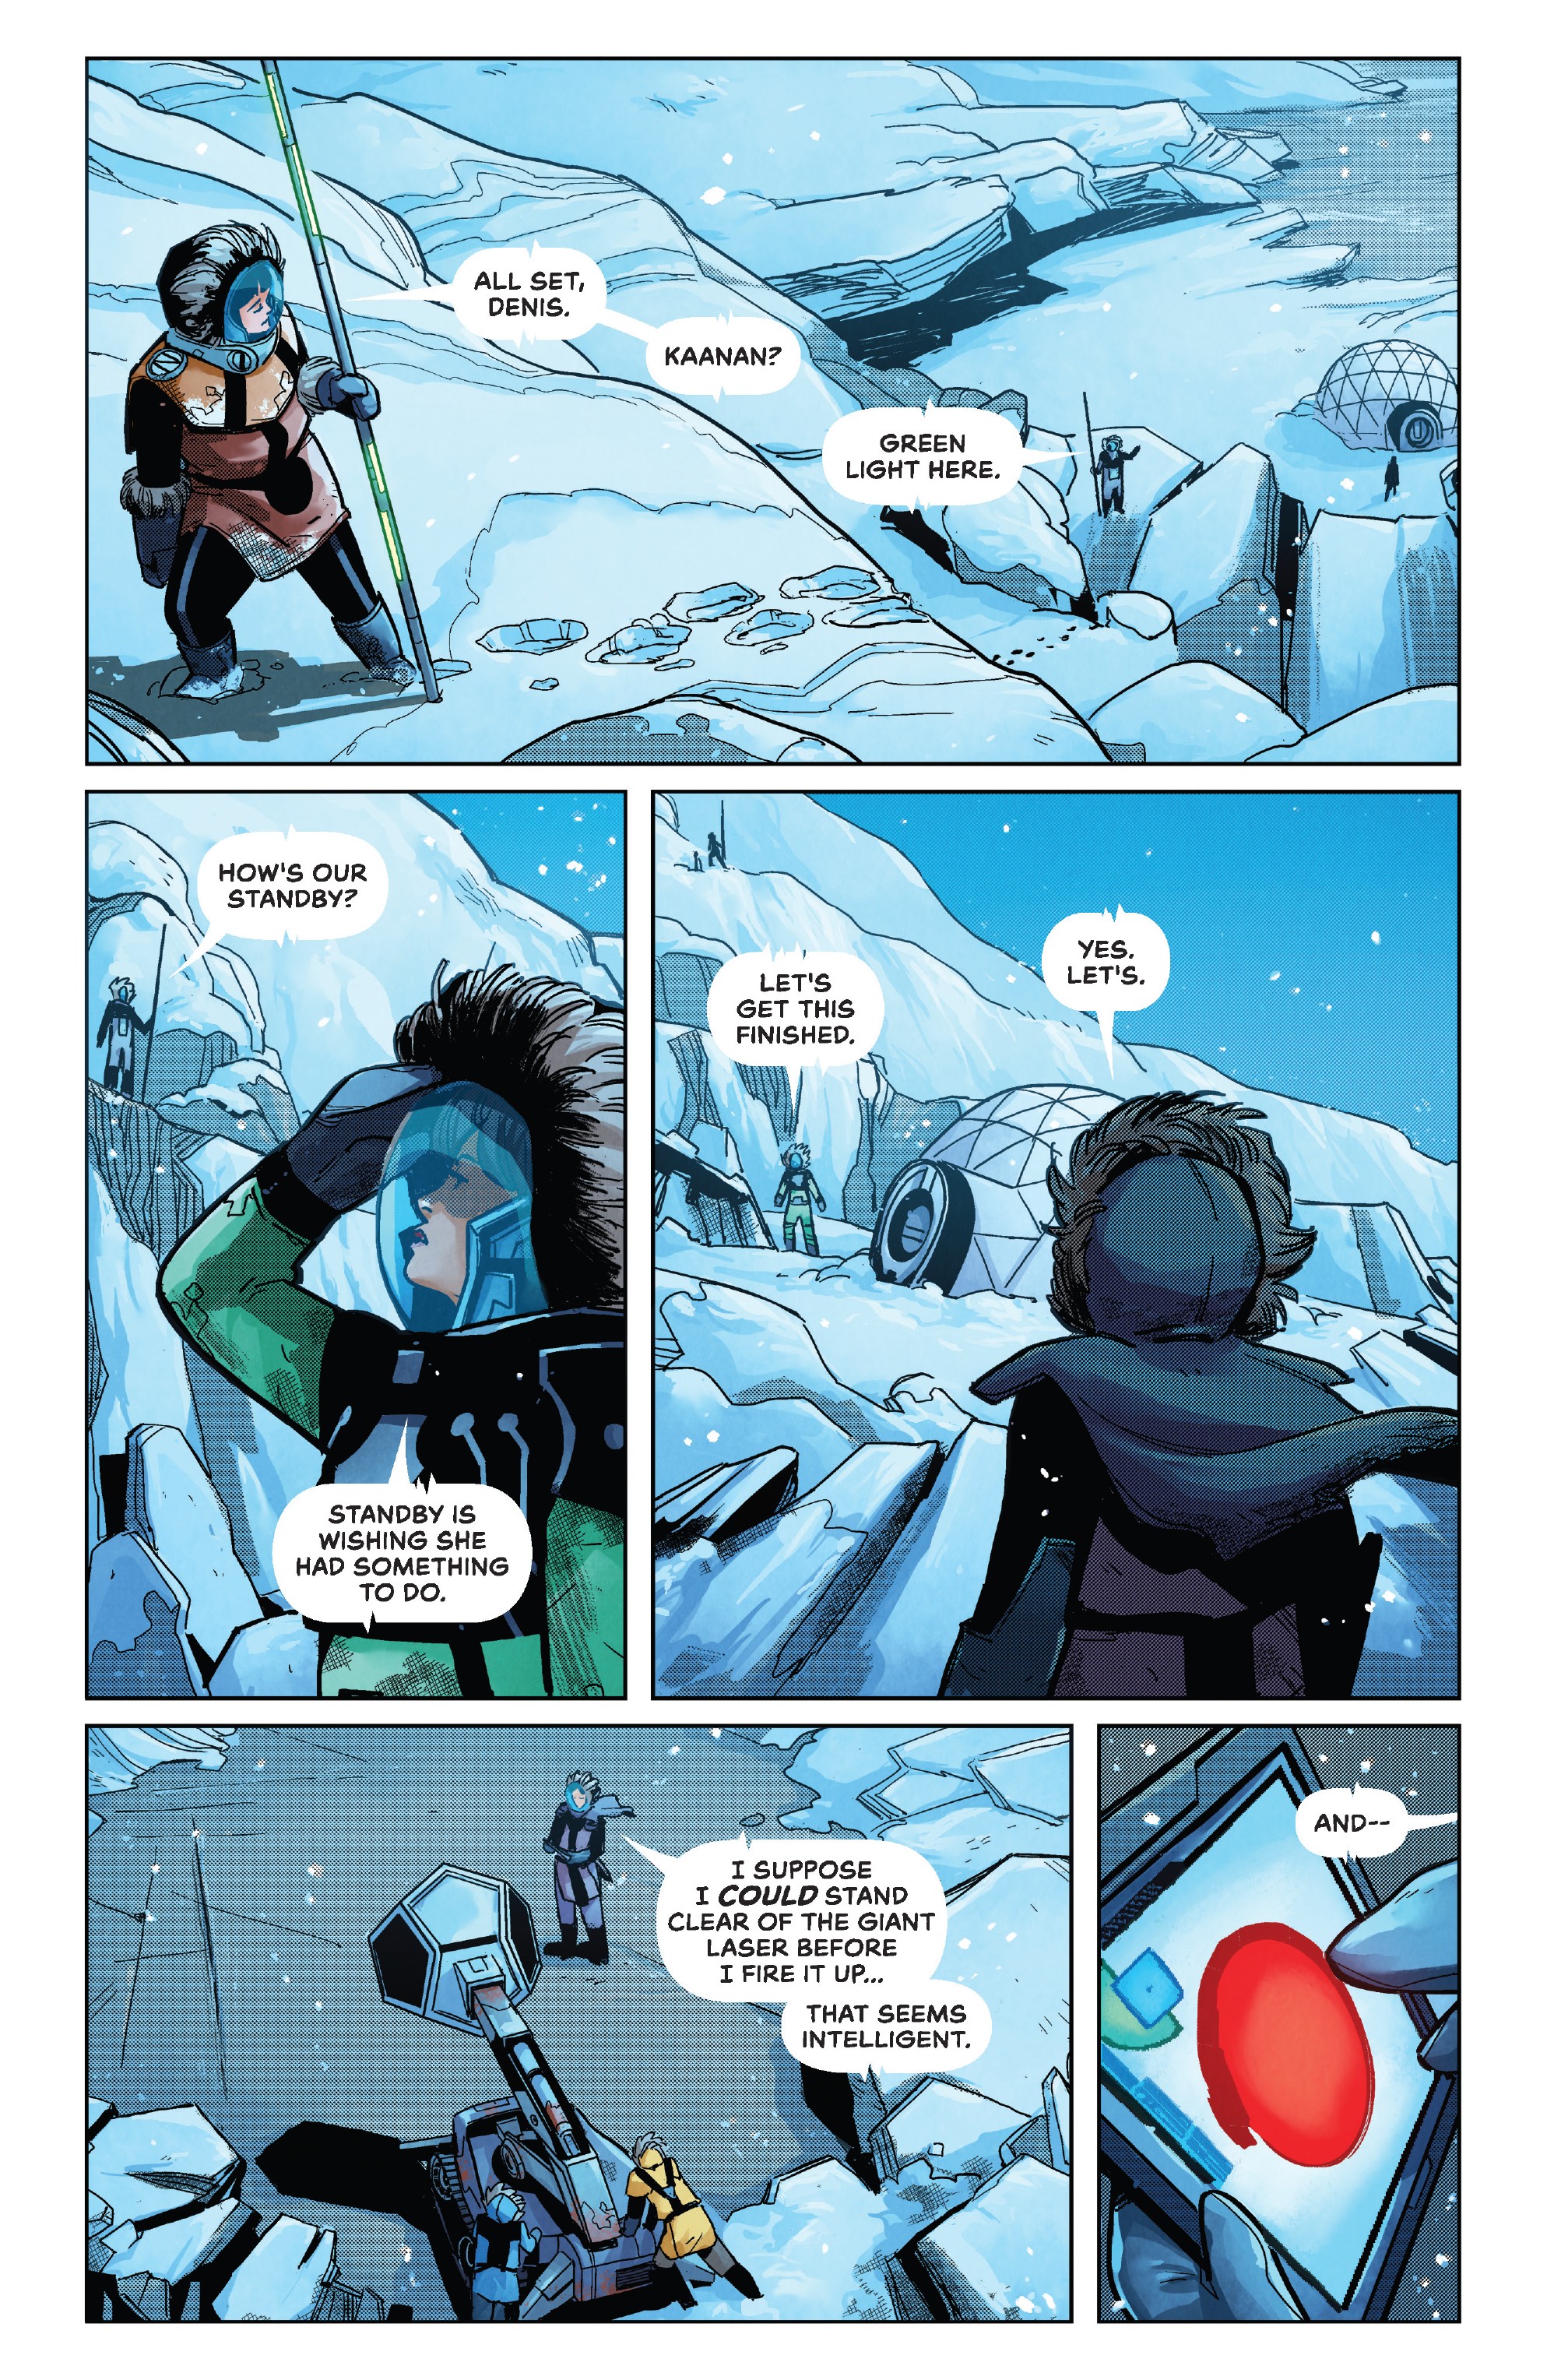 Outpost Zero (2018-): Chapter 8 - Page 3